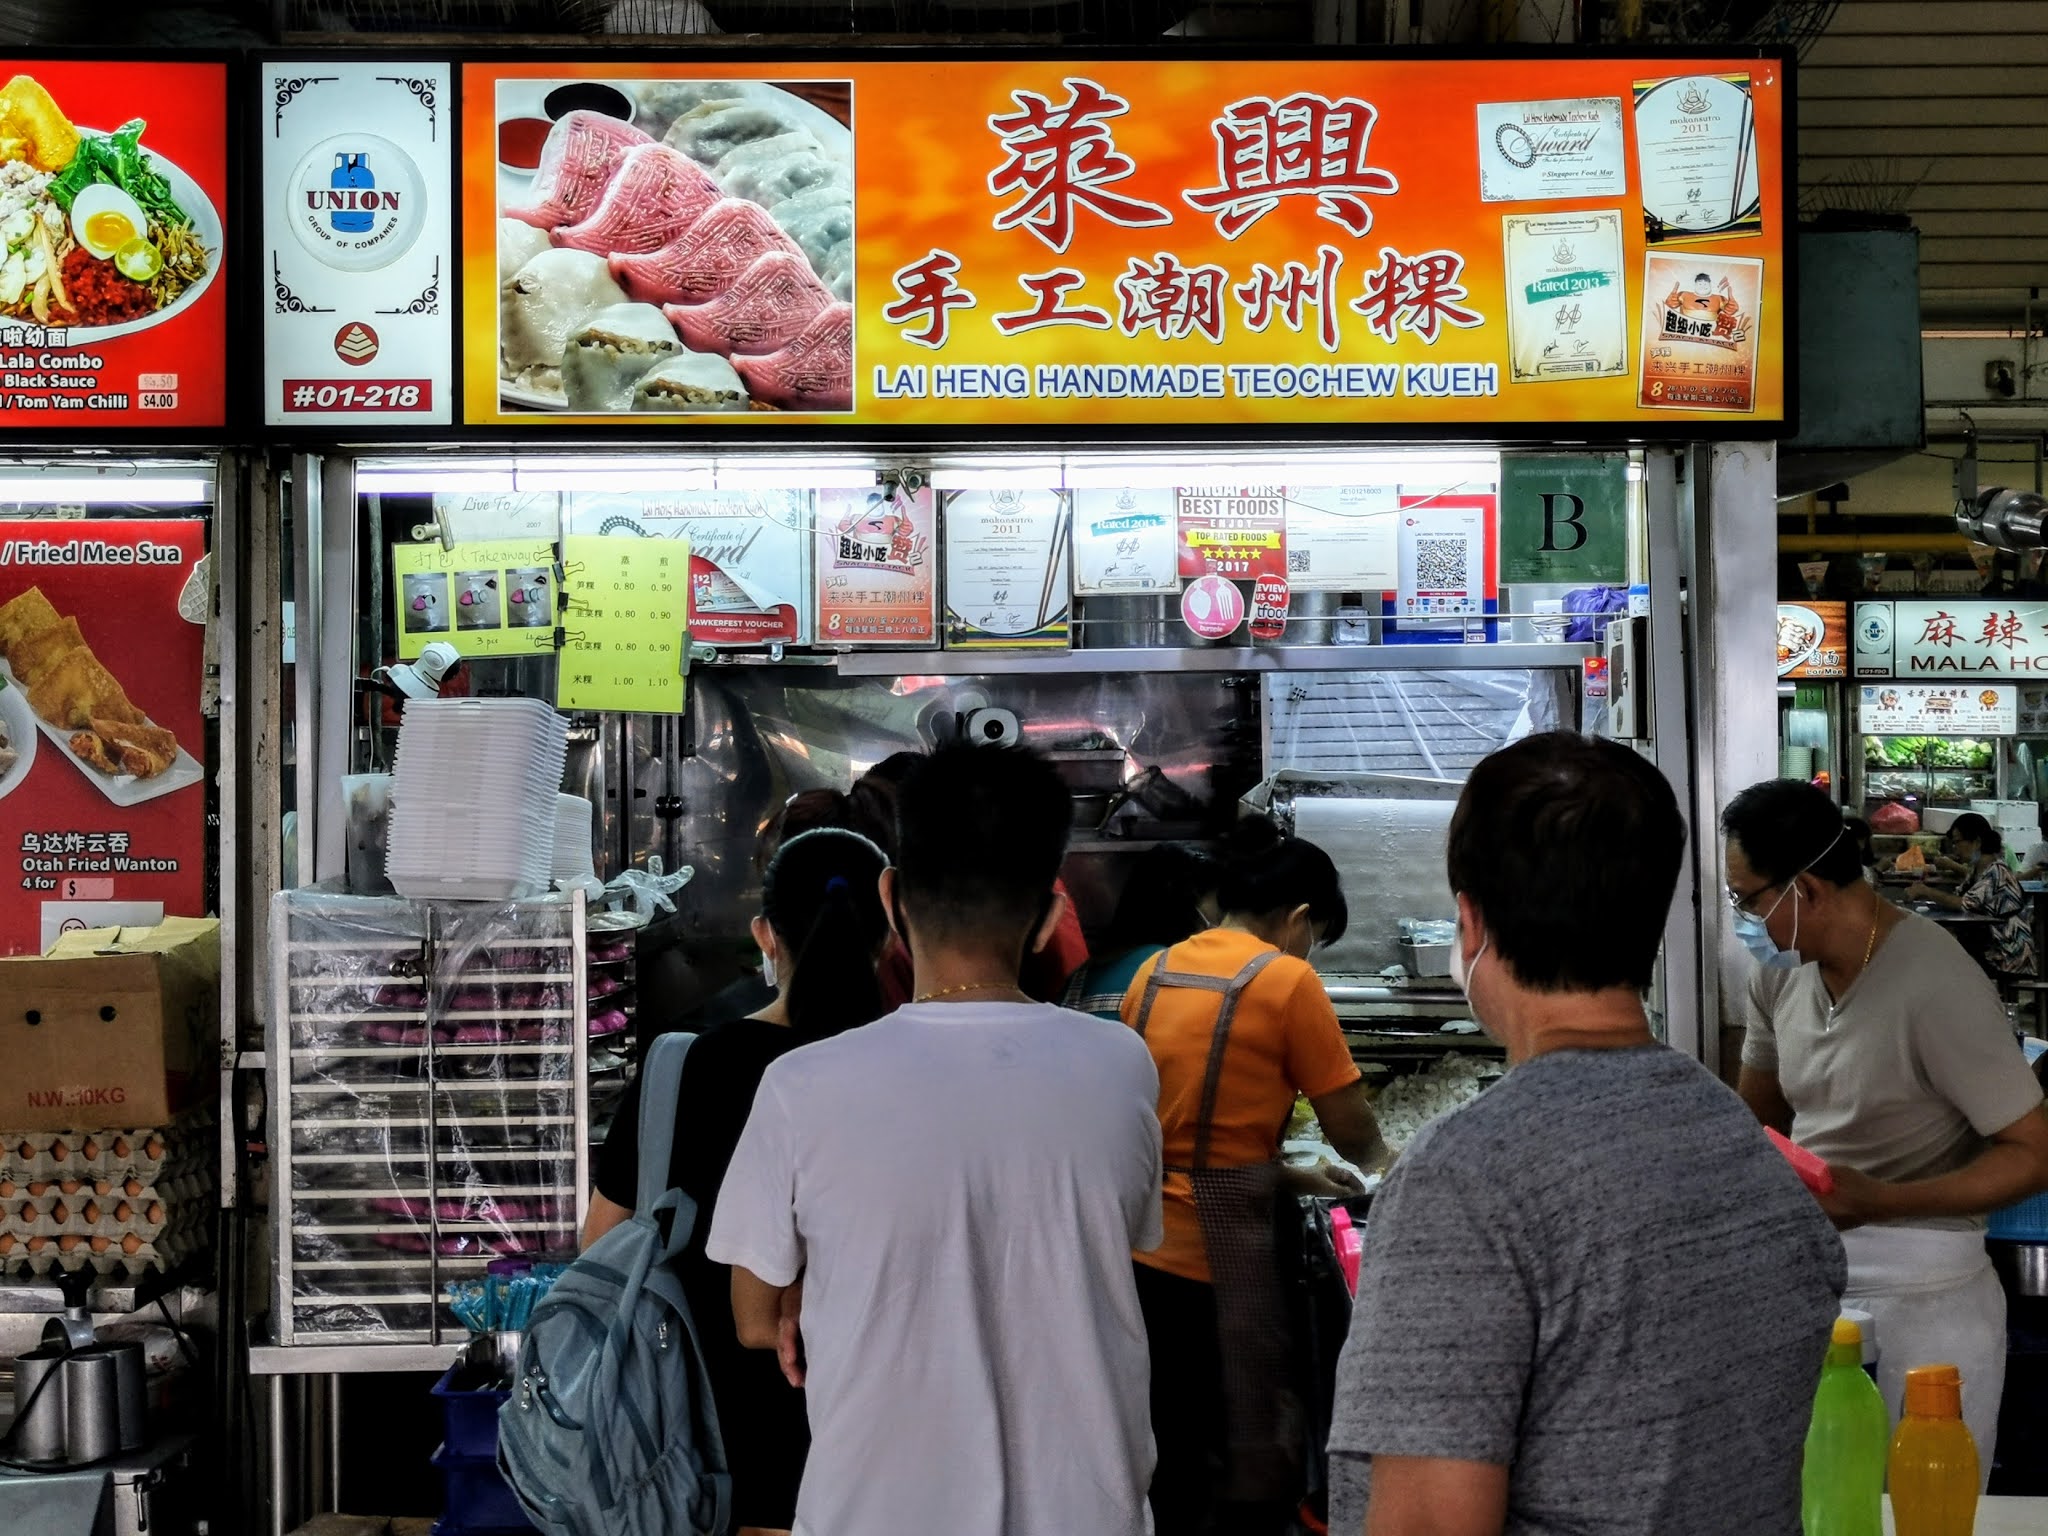 What to Eat @ YuHua Place Market & Hawker Centre. Some of the Best Food